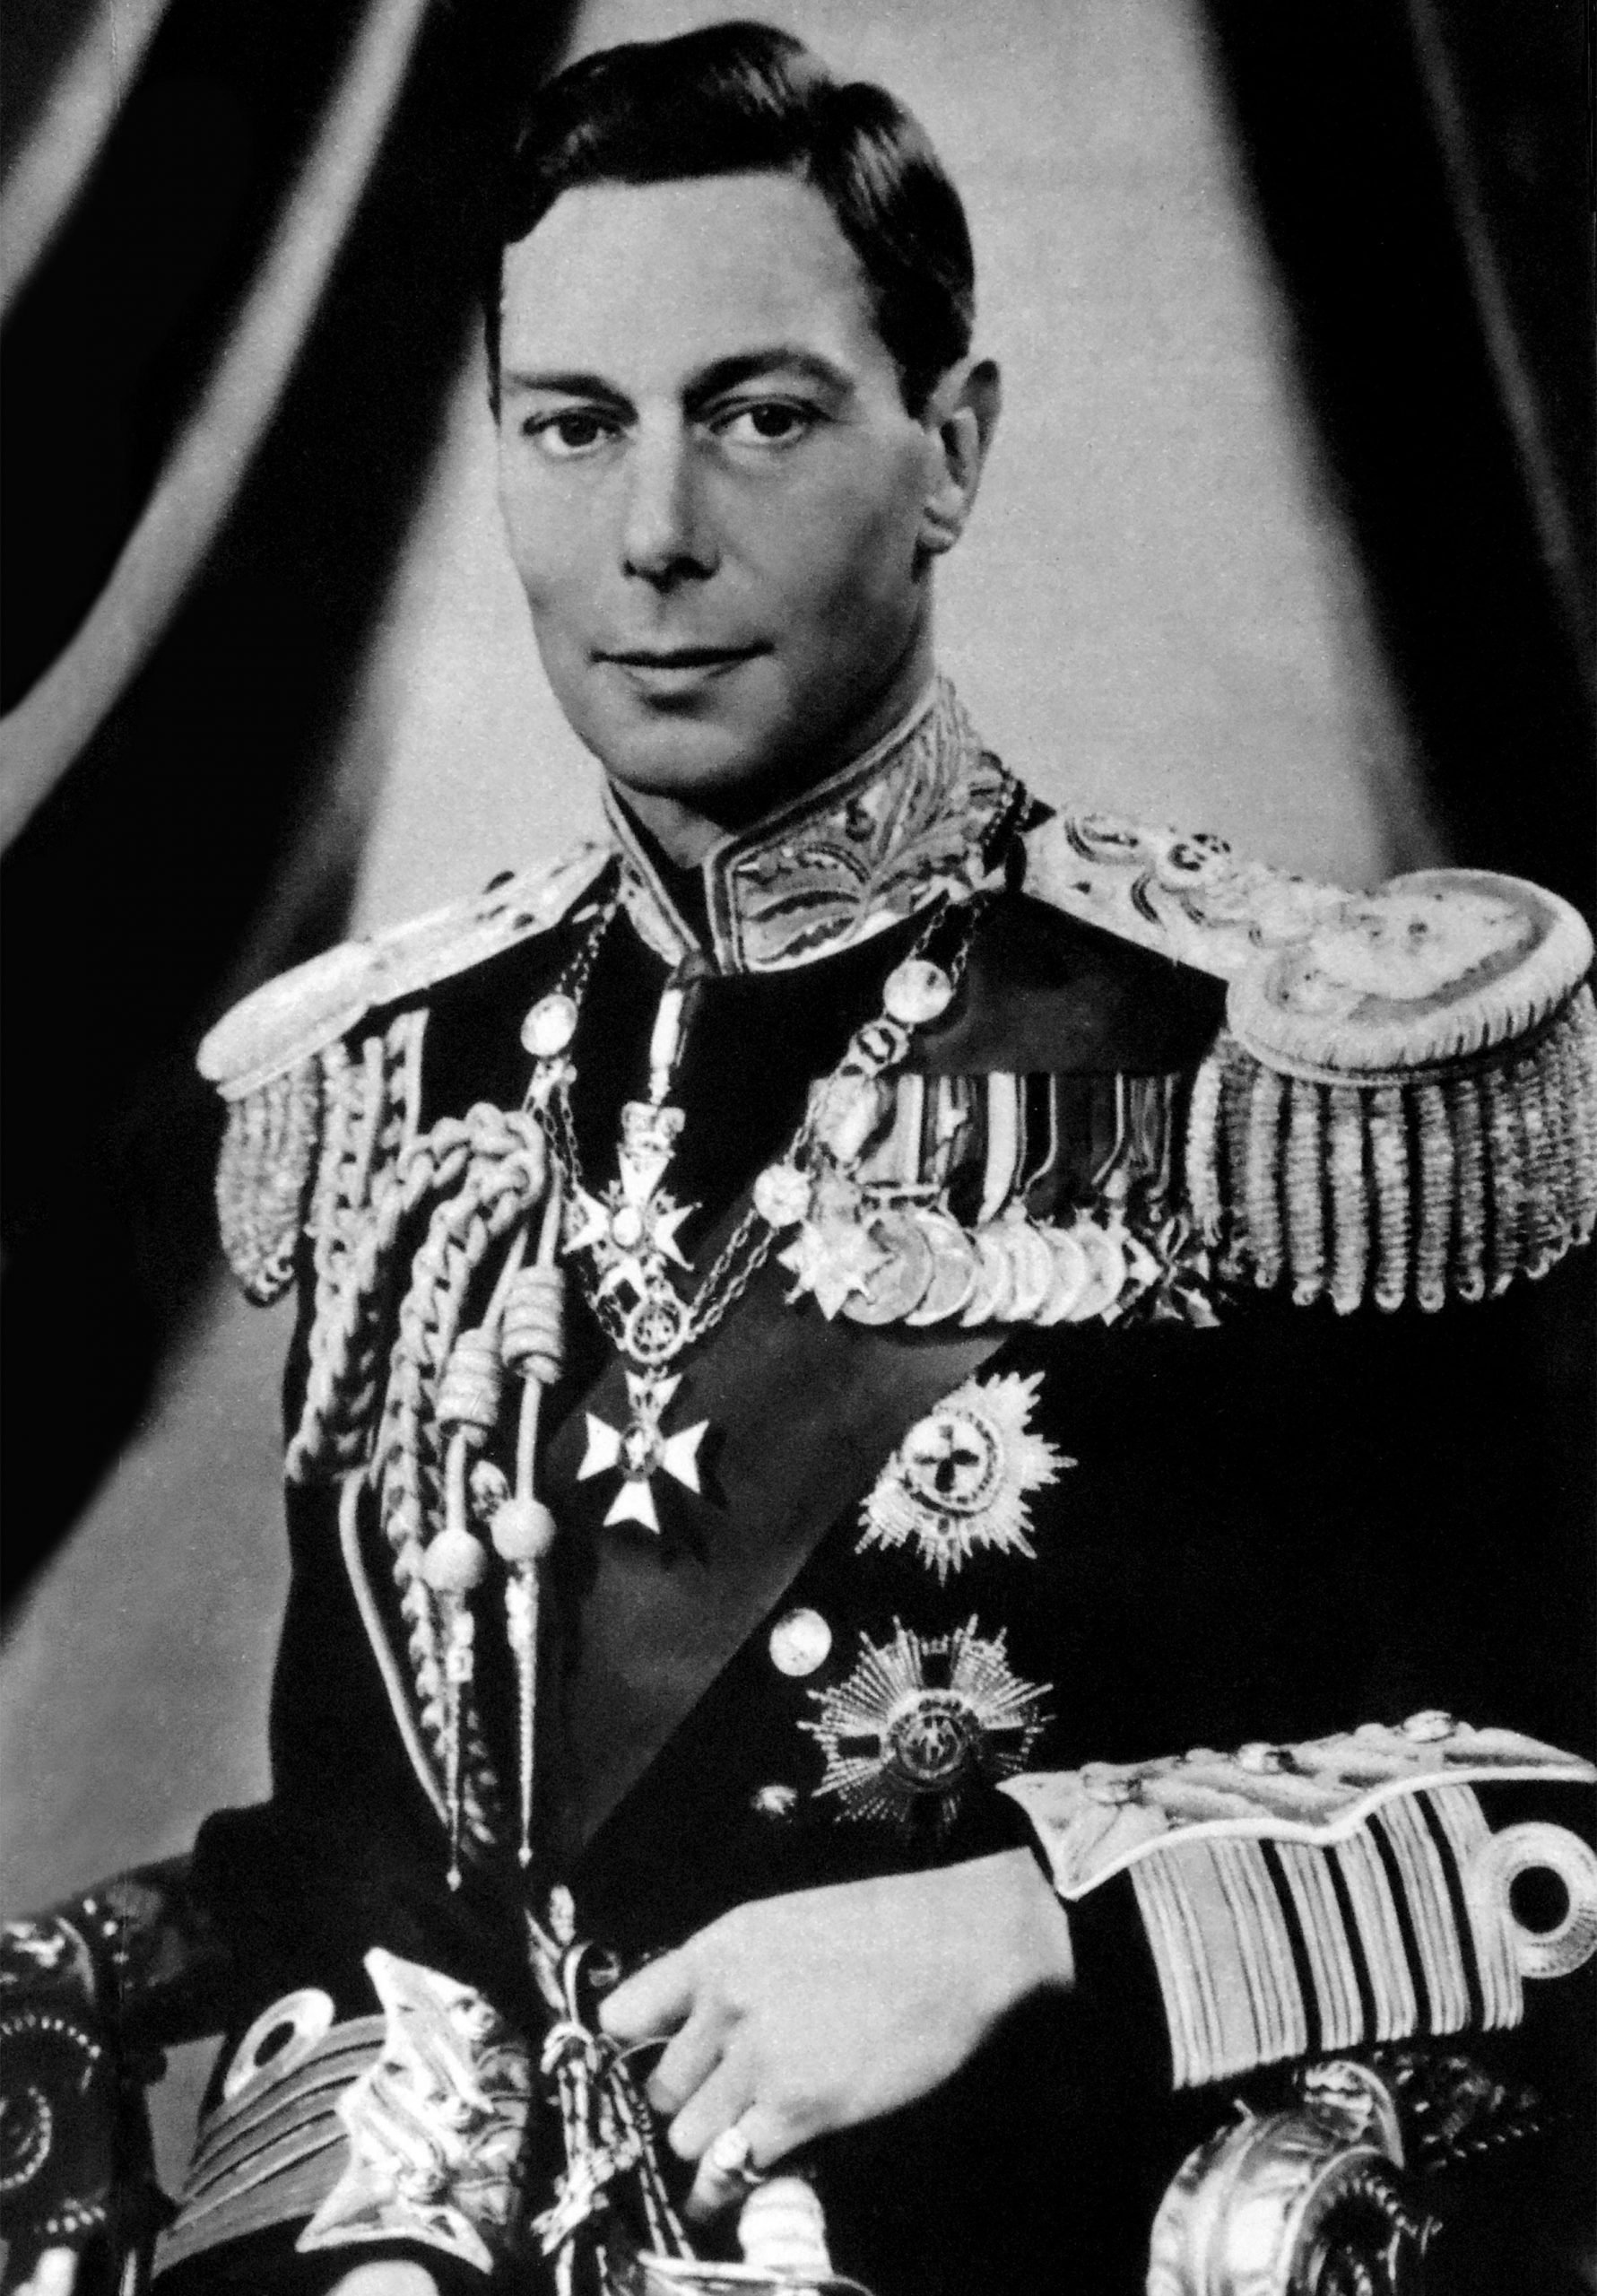 The Scandalous Story of How King George VI Became King | Reader's Digest